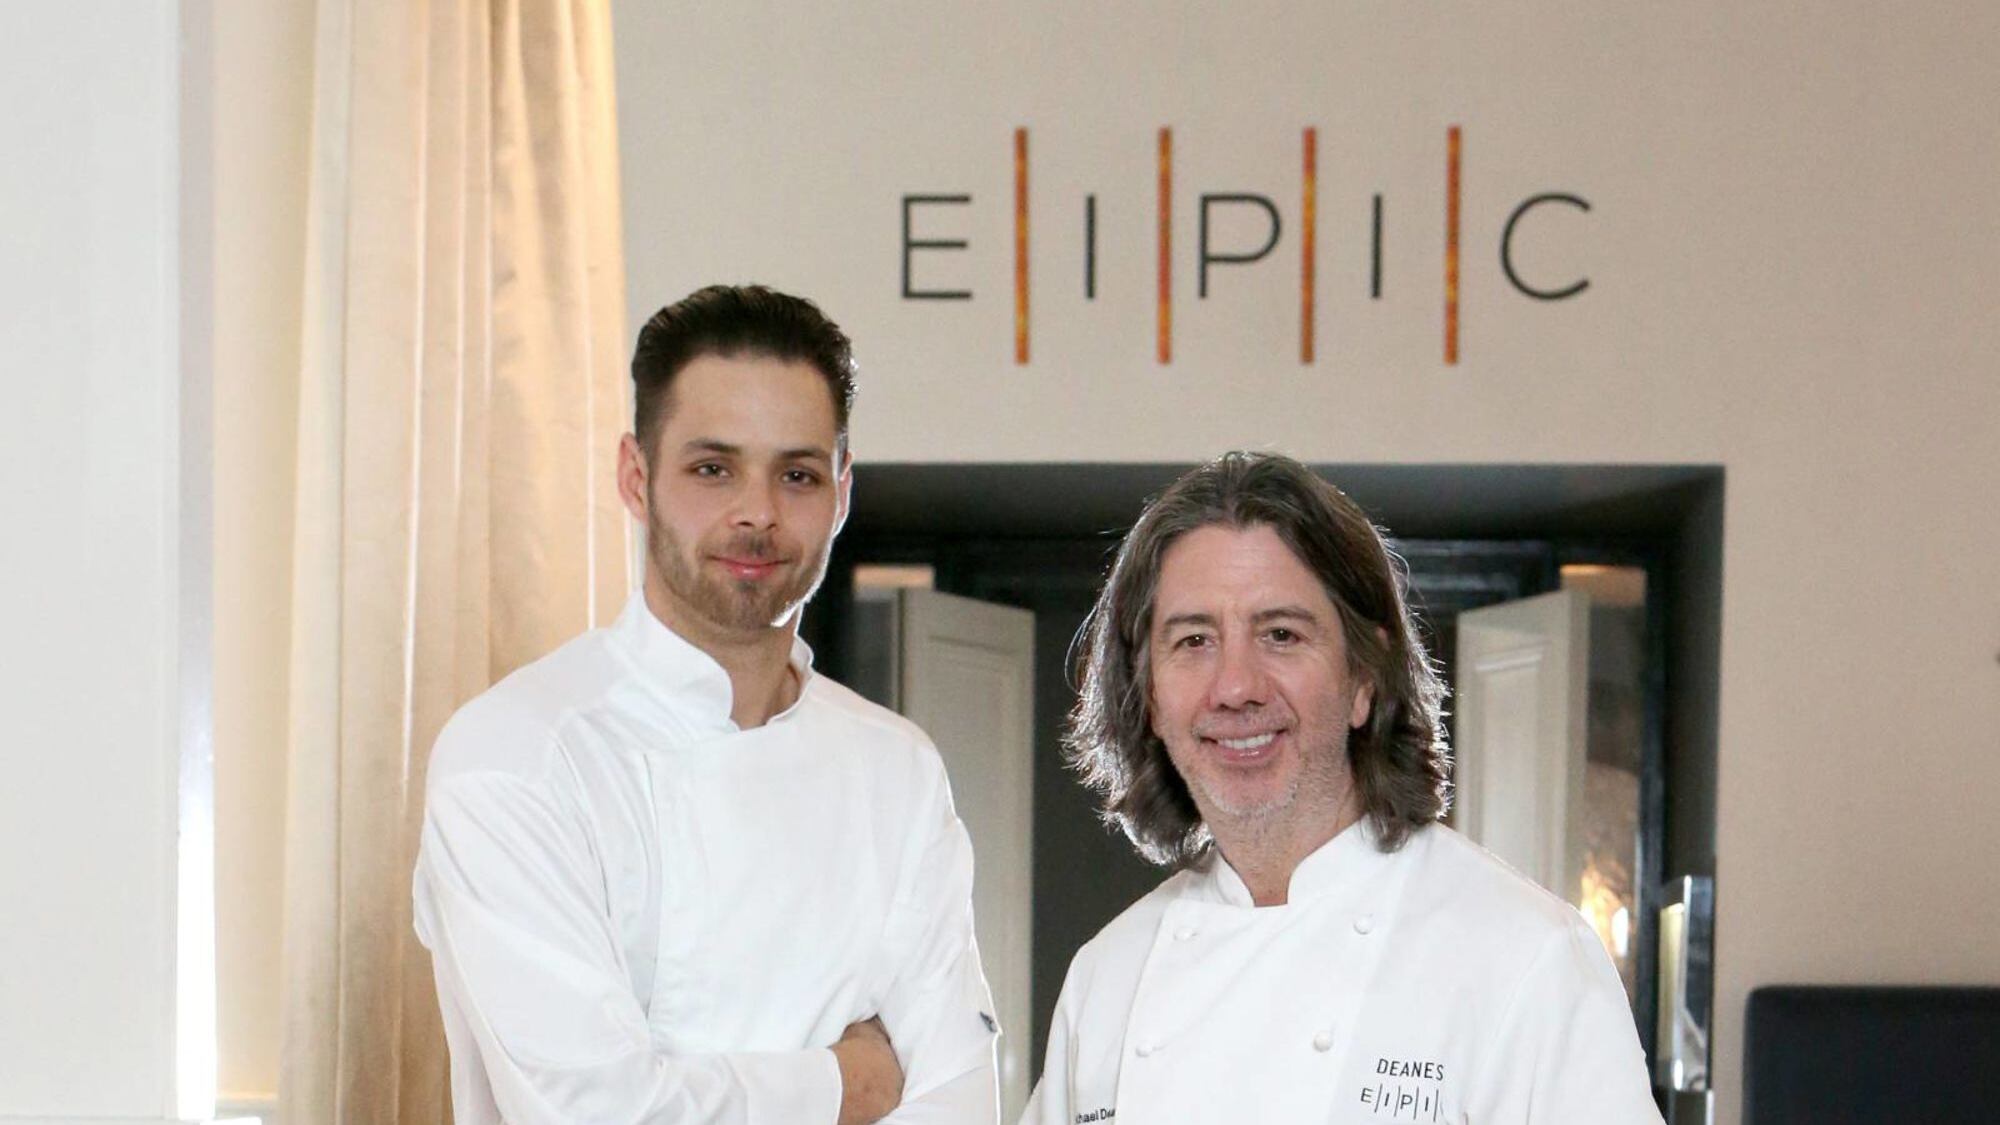 &nbsp;Michael Deane (rught) and Ales Greene at Eipic